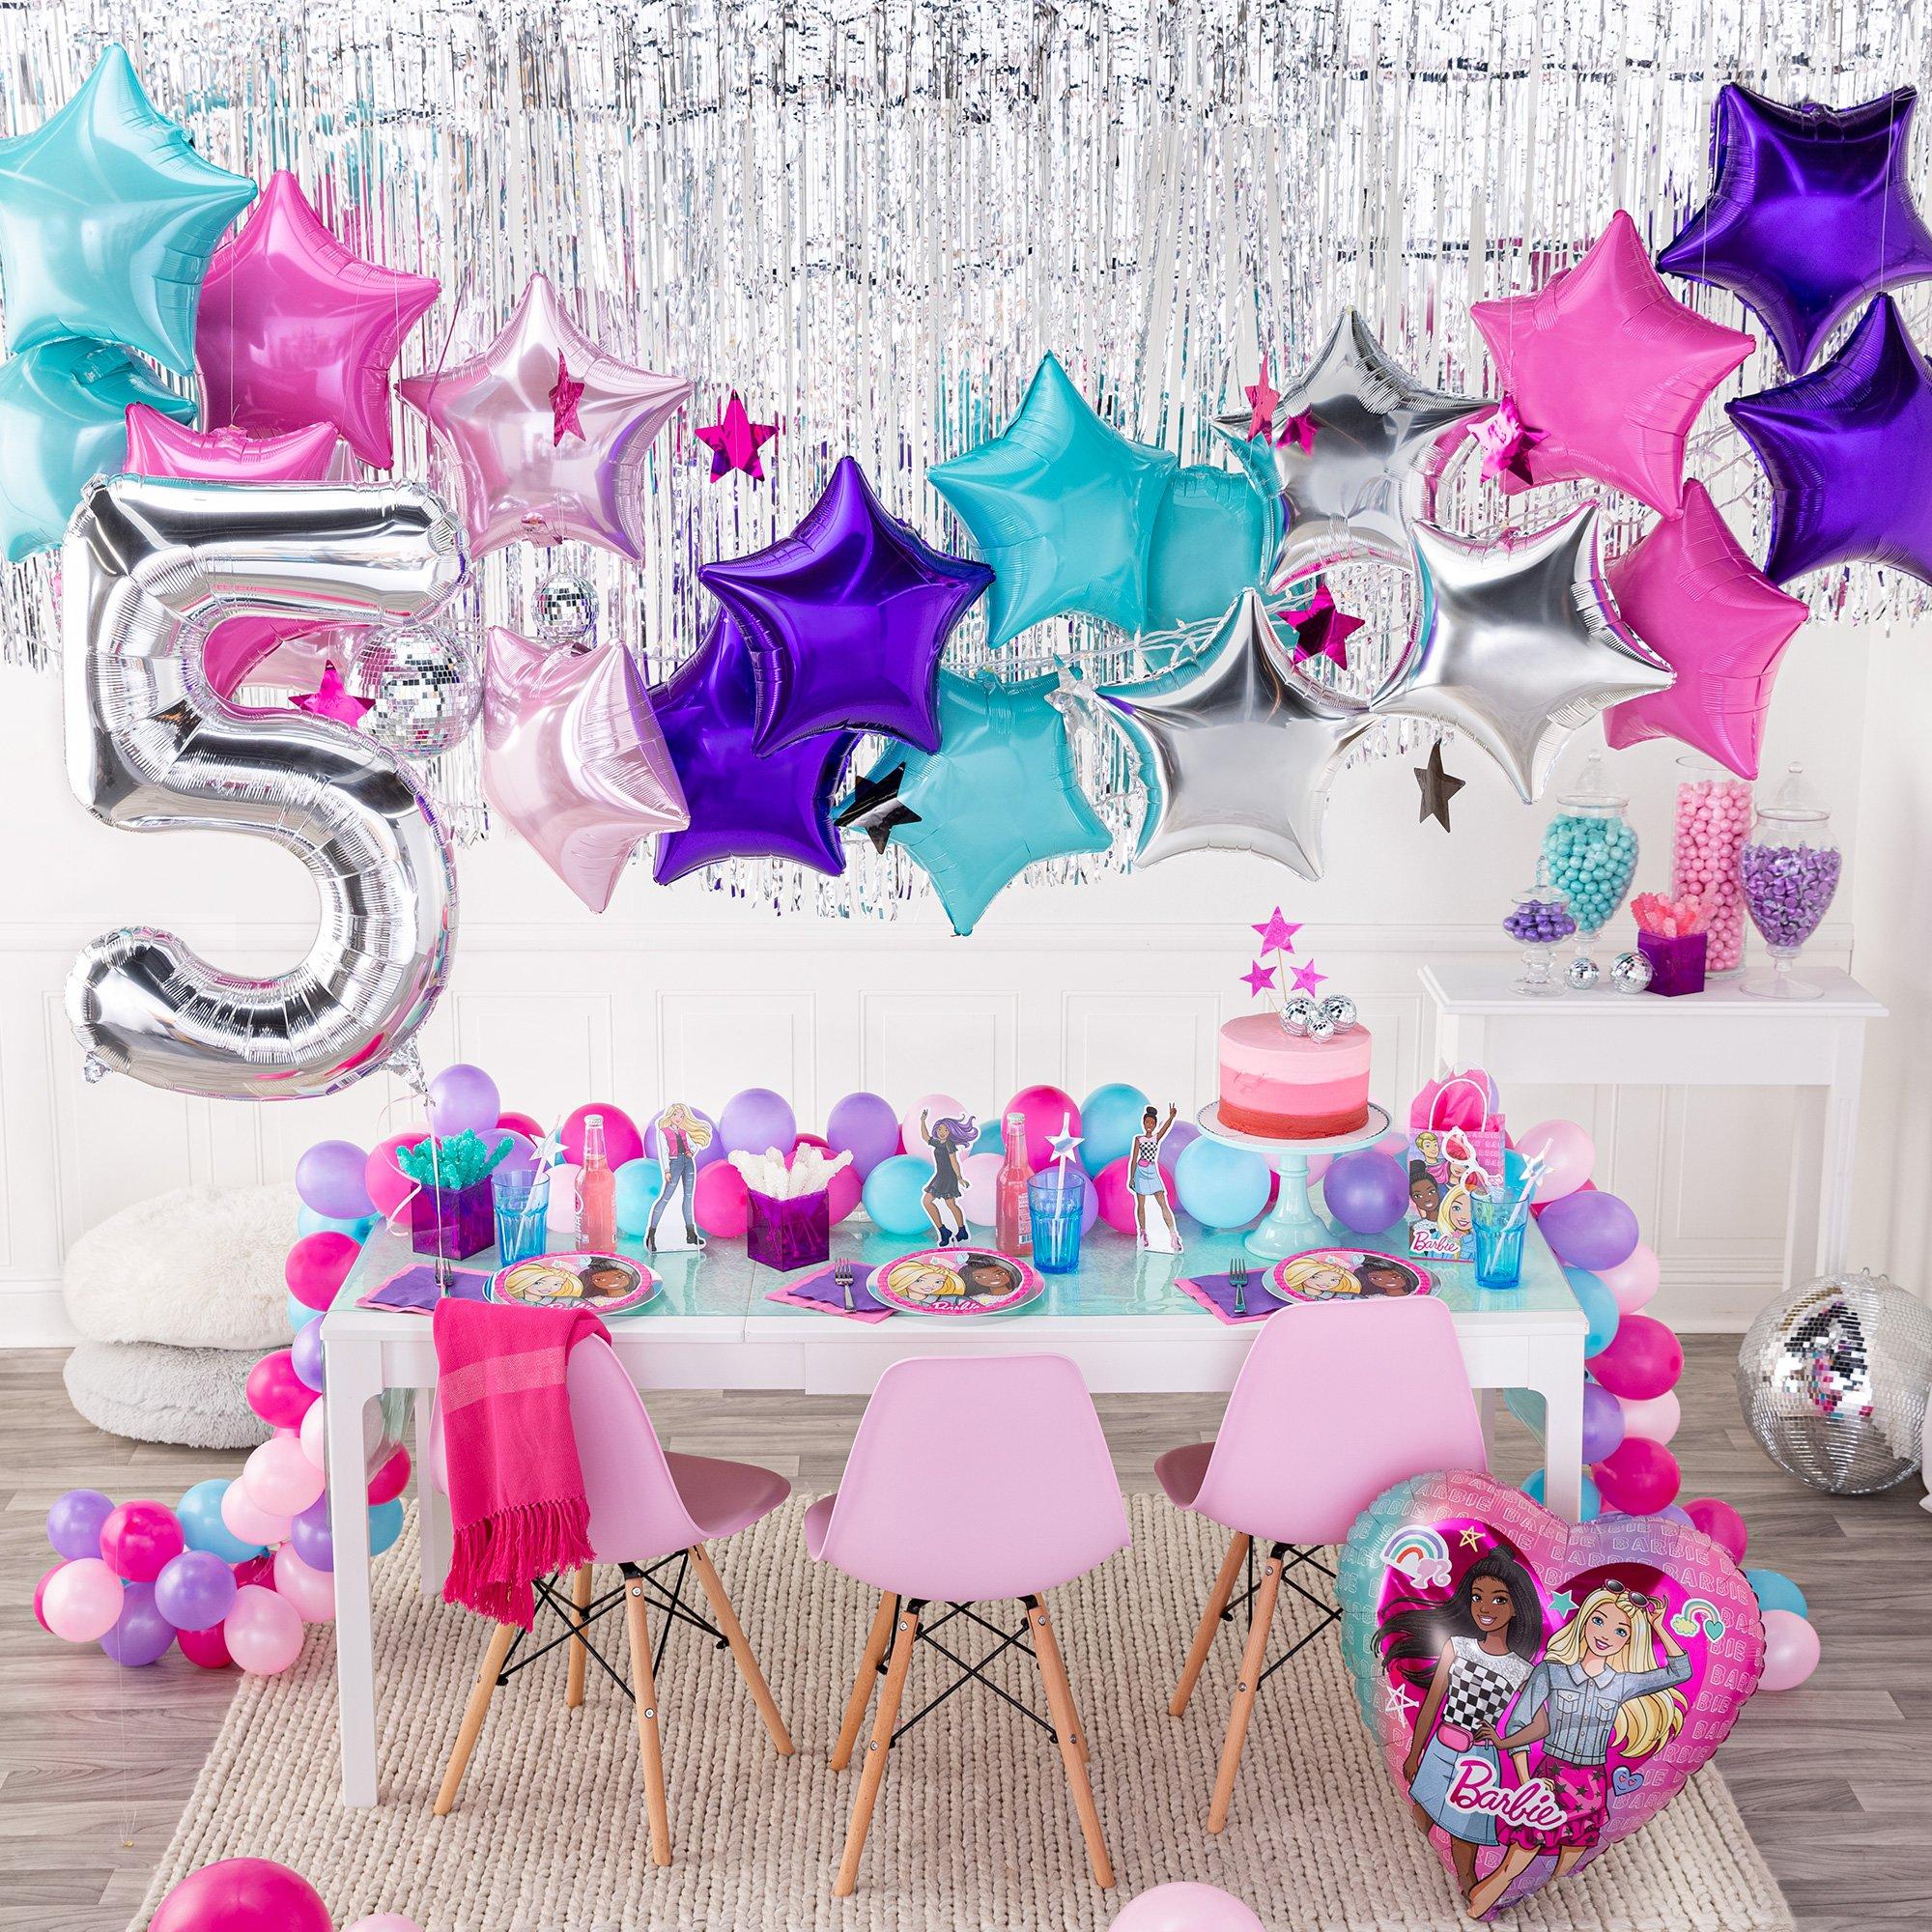 DMoment Events on Instagram: Come on barbie, Let's go party!! 😍😍 Barbie  theme birthday party decoration. This Barbie theme bday decor includes main  backdrop, entrance decor, table toppers and photobooth &, cake